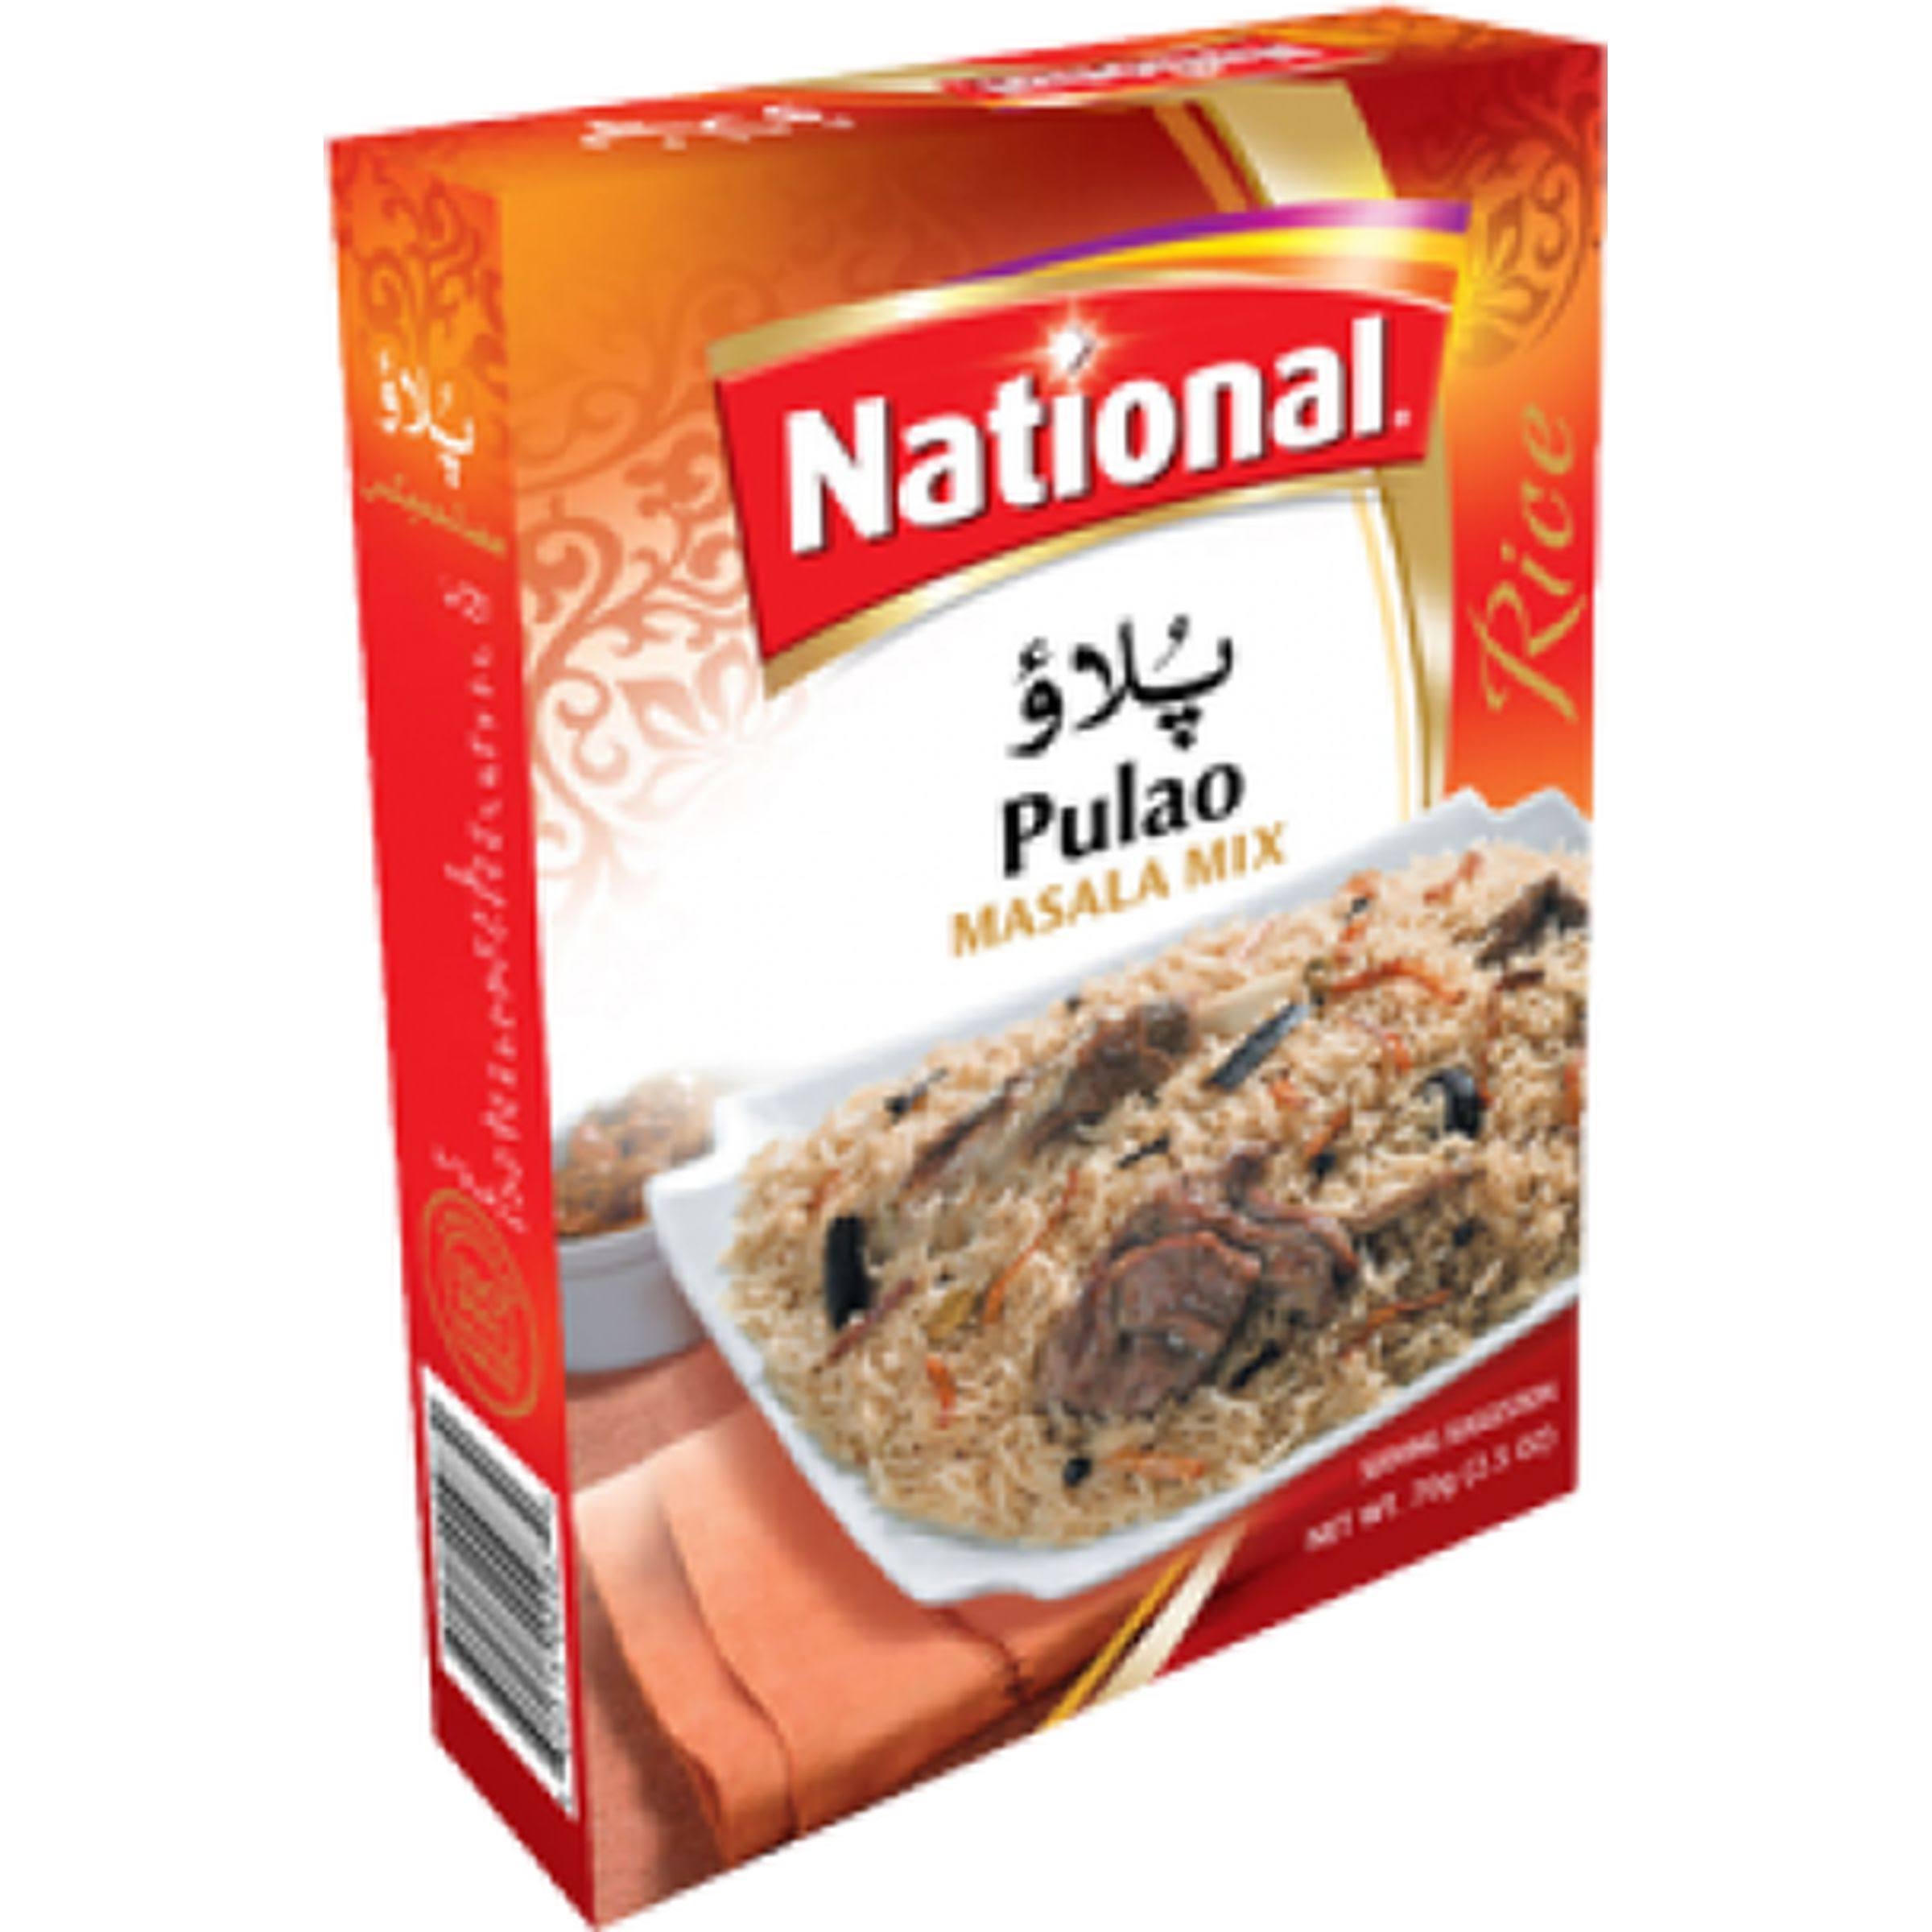 National Pulao| Grocery Delivery Service | SaveCo Online Ltd